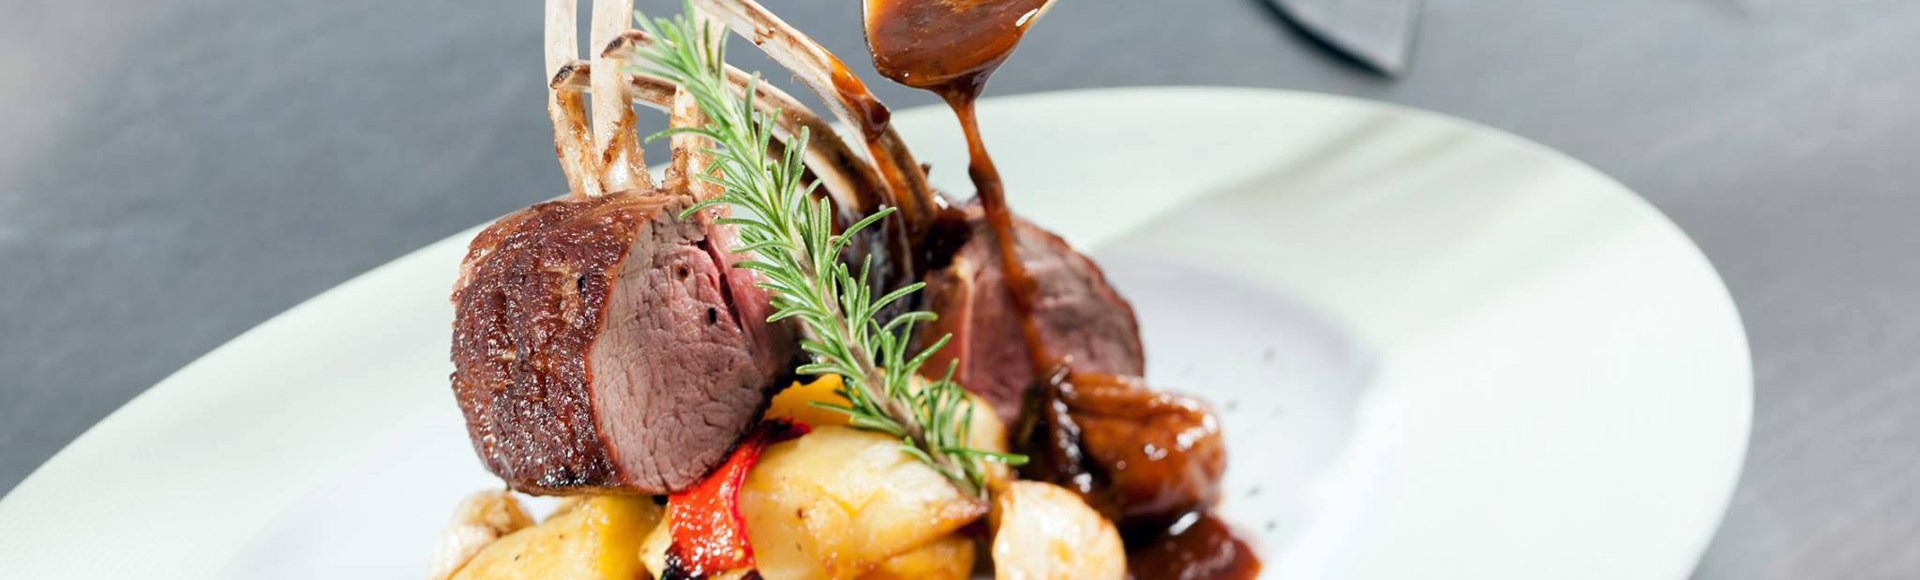 crown-of-lamb-with-baked-potatoes-and-chestnut-in-a-demi-glase-sauce - Private Chef Service For Your Villa Holidays In Santorini, Cyclades, Greece